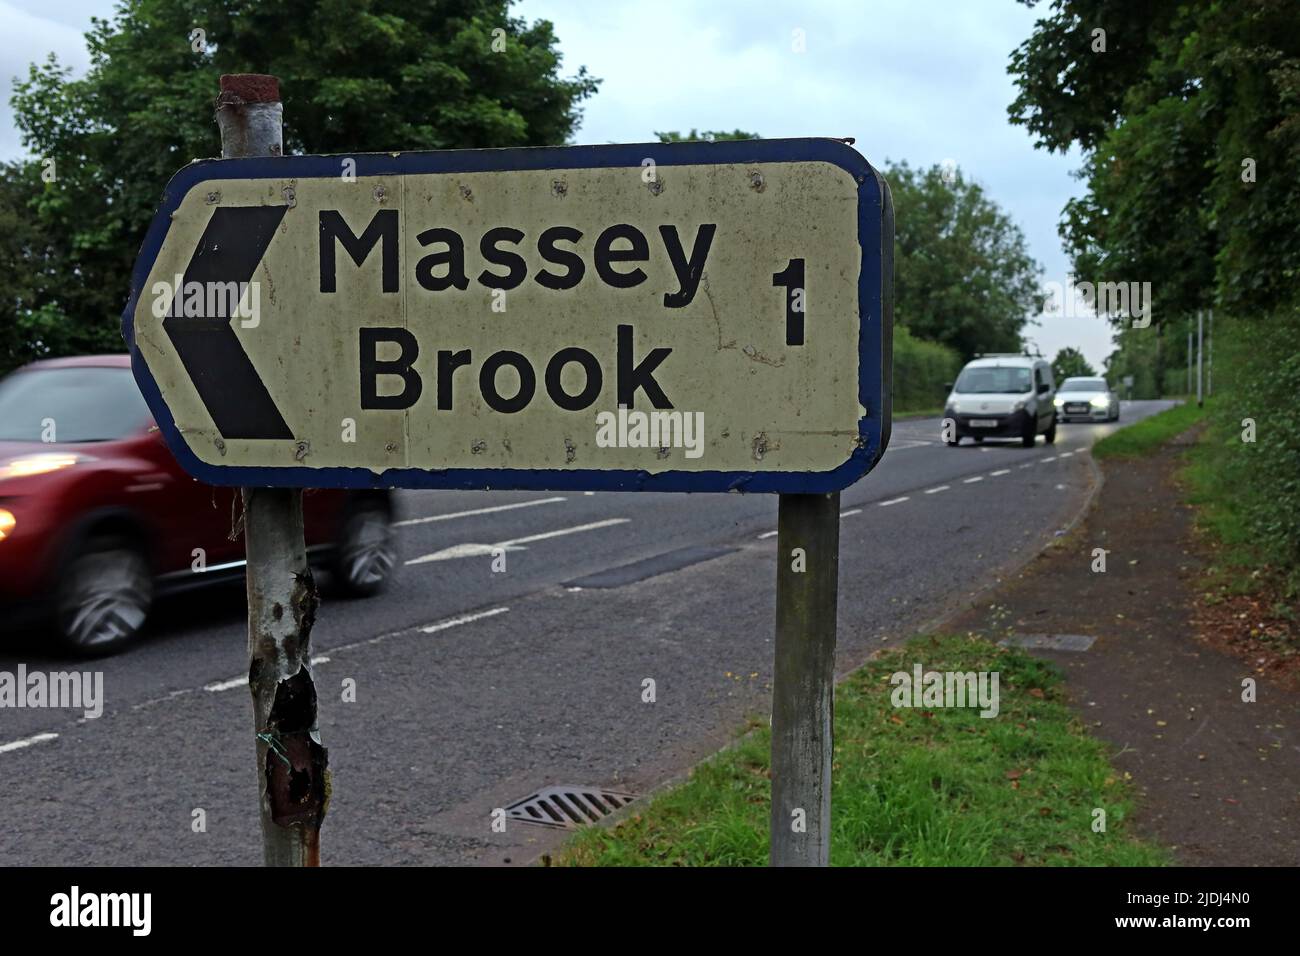 Massey Brook sign, Cliff Ln, next to the busy A50 towards the M6 Motorway, Grappenhall, Warrington, Cheshire, England, UK, WA4 Stock Photo